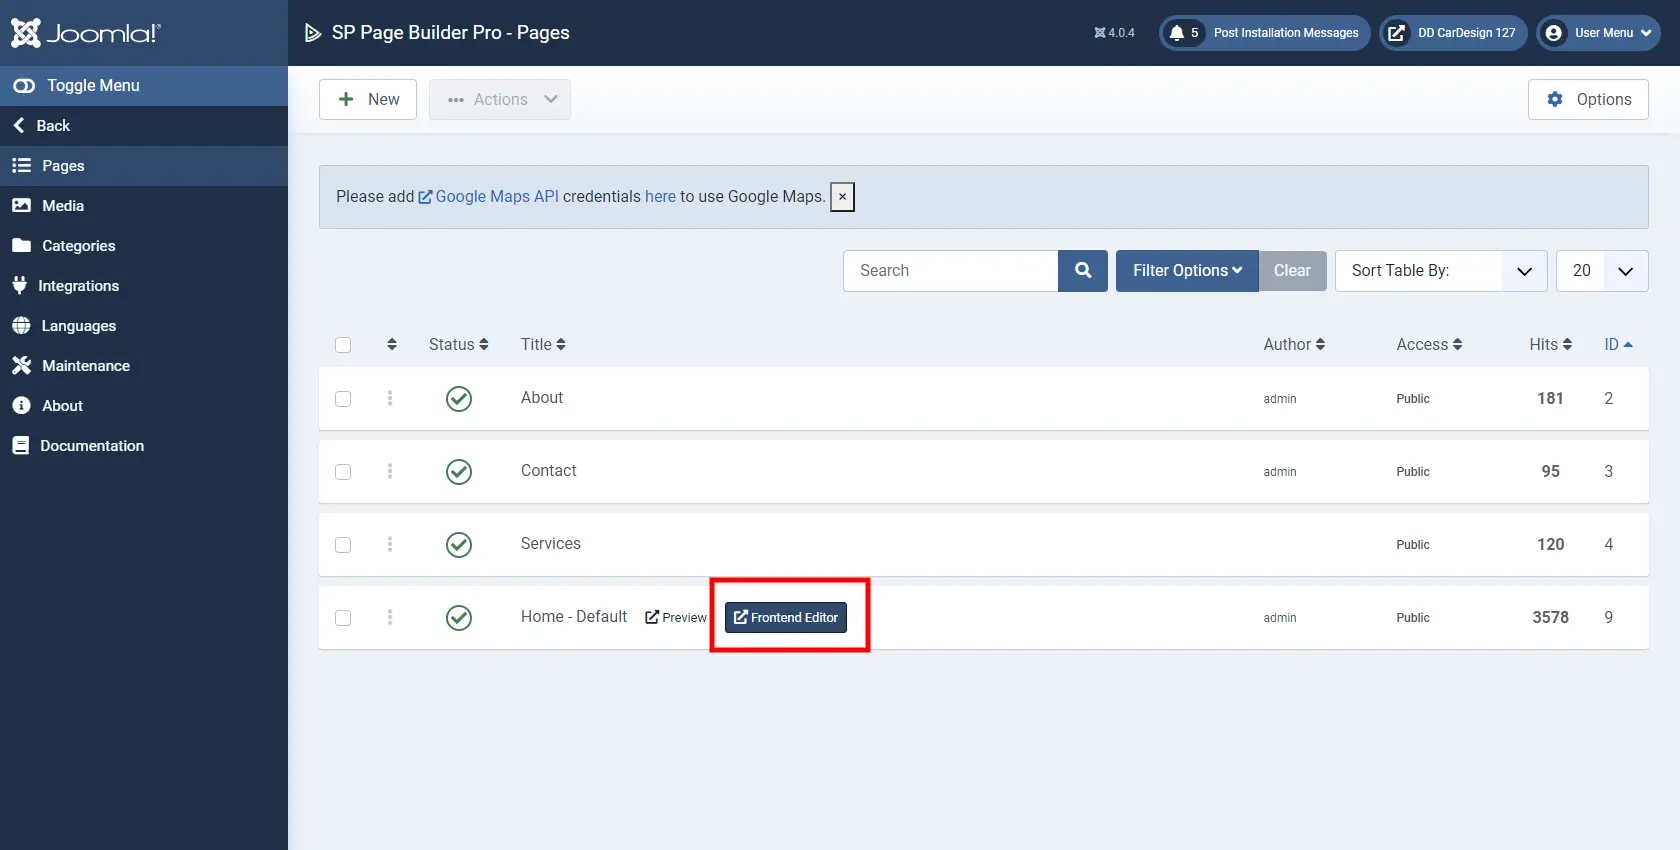 The screenshot shows the administration panel and the SP Page Builder component transition to edit the page